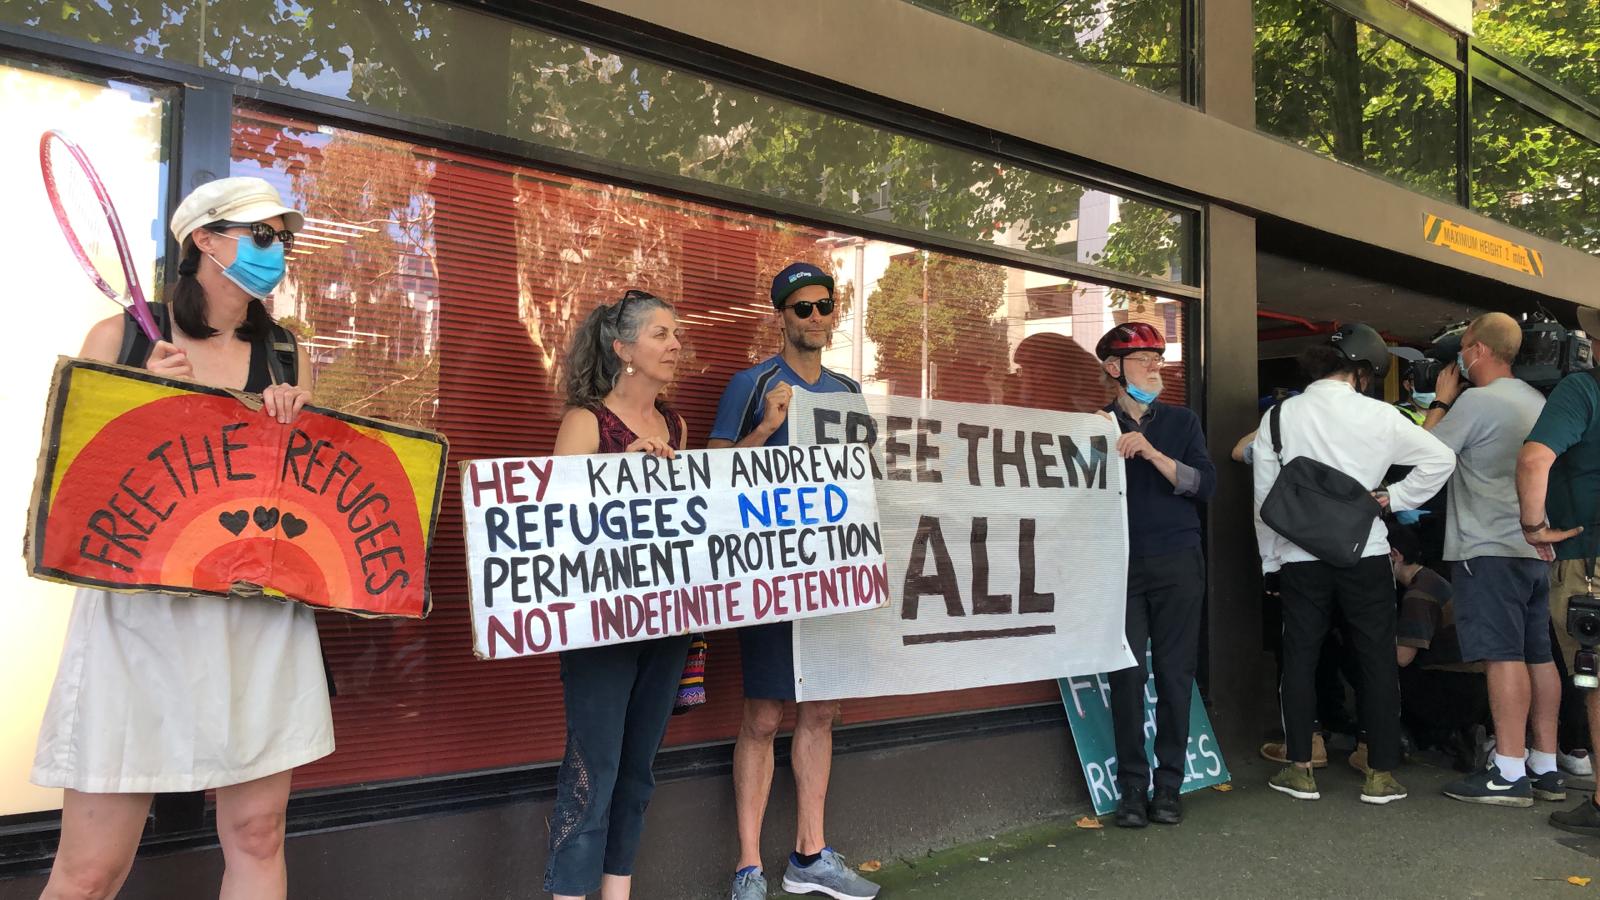 Protesters outside the Park Hotel in Melbourne, Australia on January 10, demonstrating against the government's policy of indefinite detention of refugees and asylum seekers.